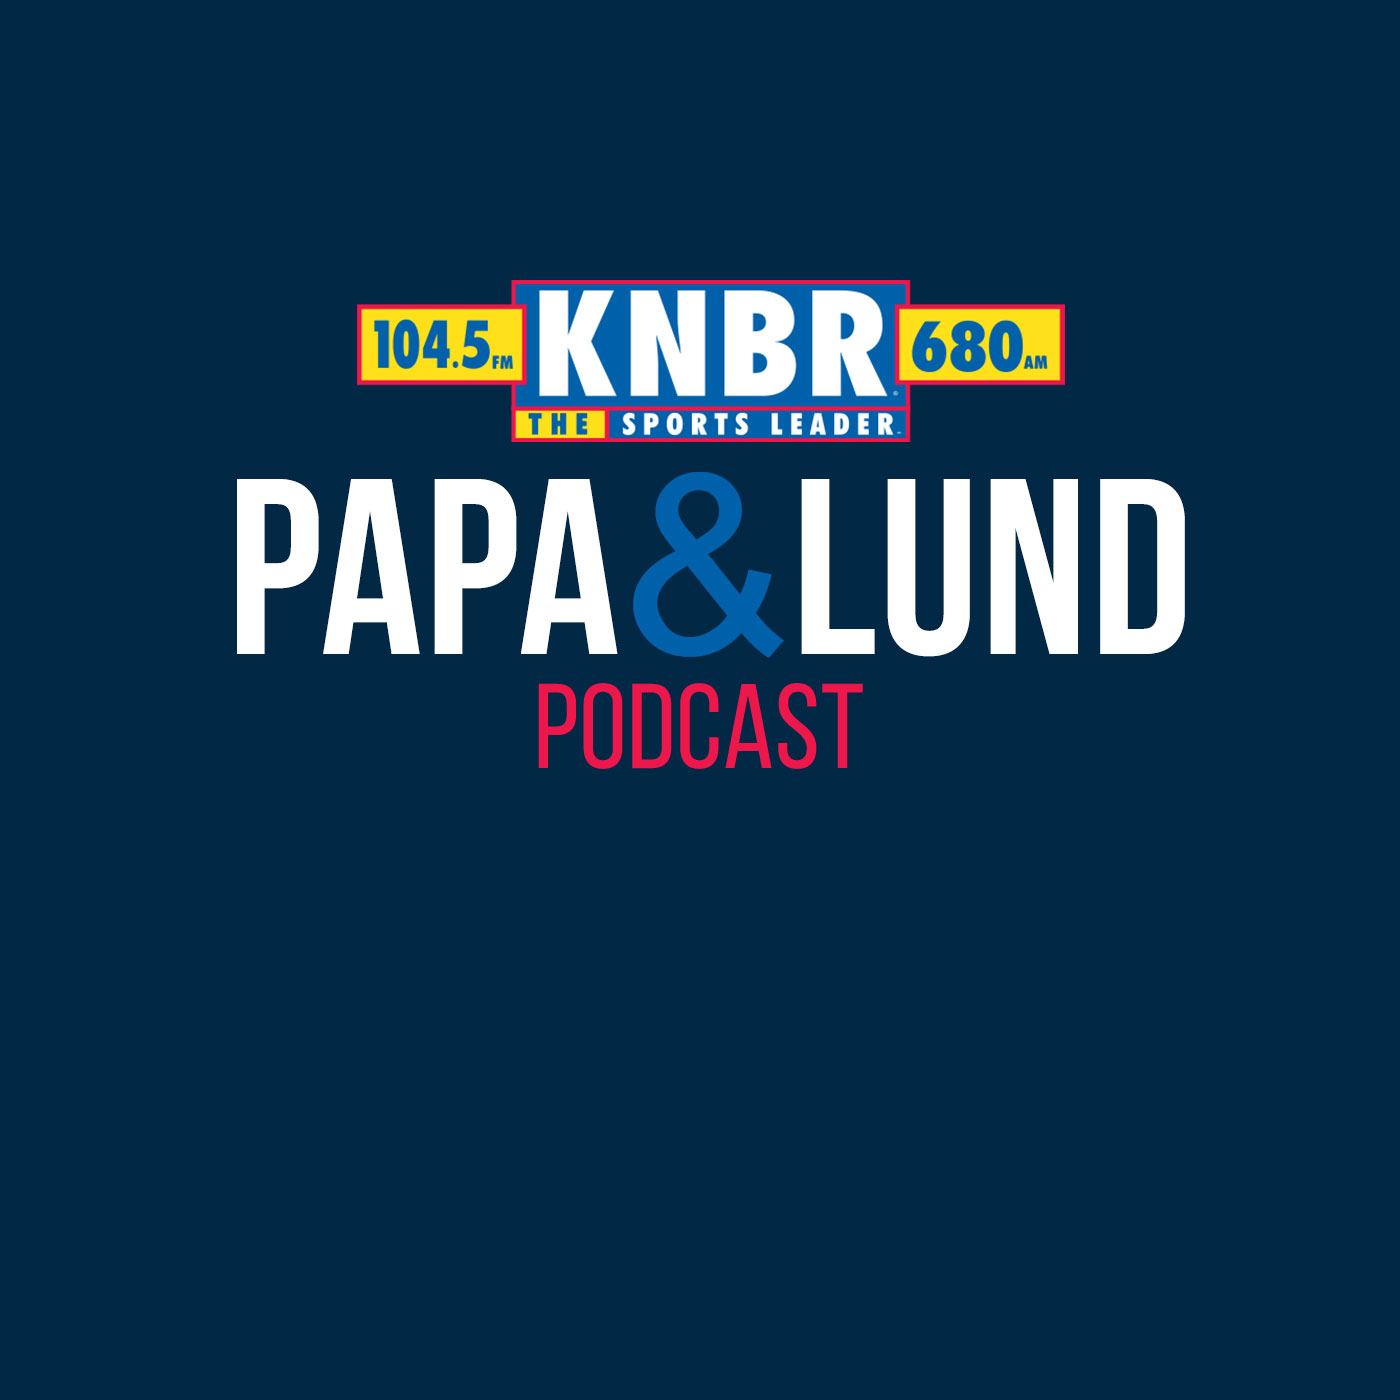 1-31 Joe Staley joins Papa & Lund to talk 2023 Senior Bowl, DeMeco Ryans leaving for the Texans, and Sunday's 49ers loss and where they go from here